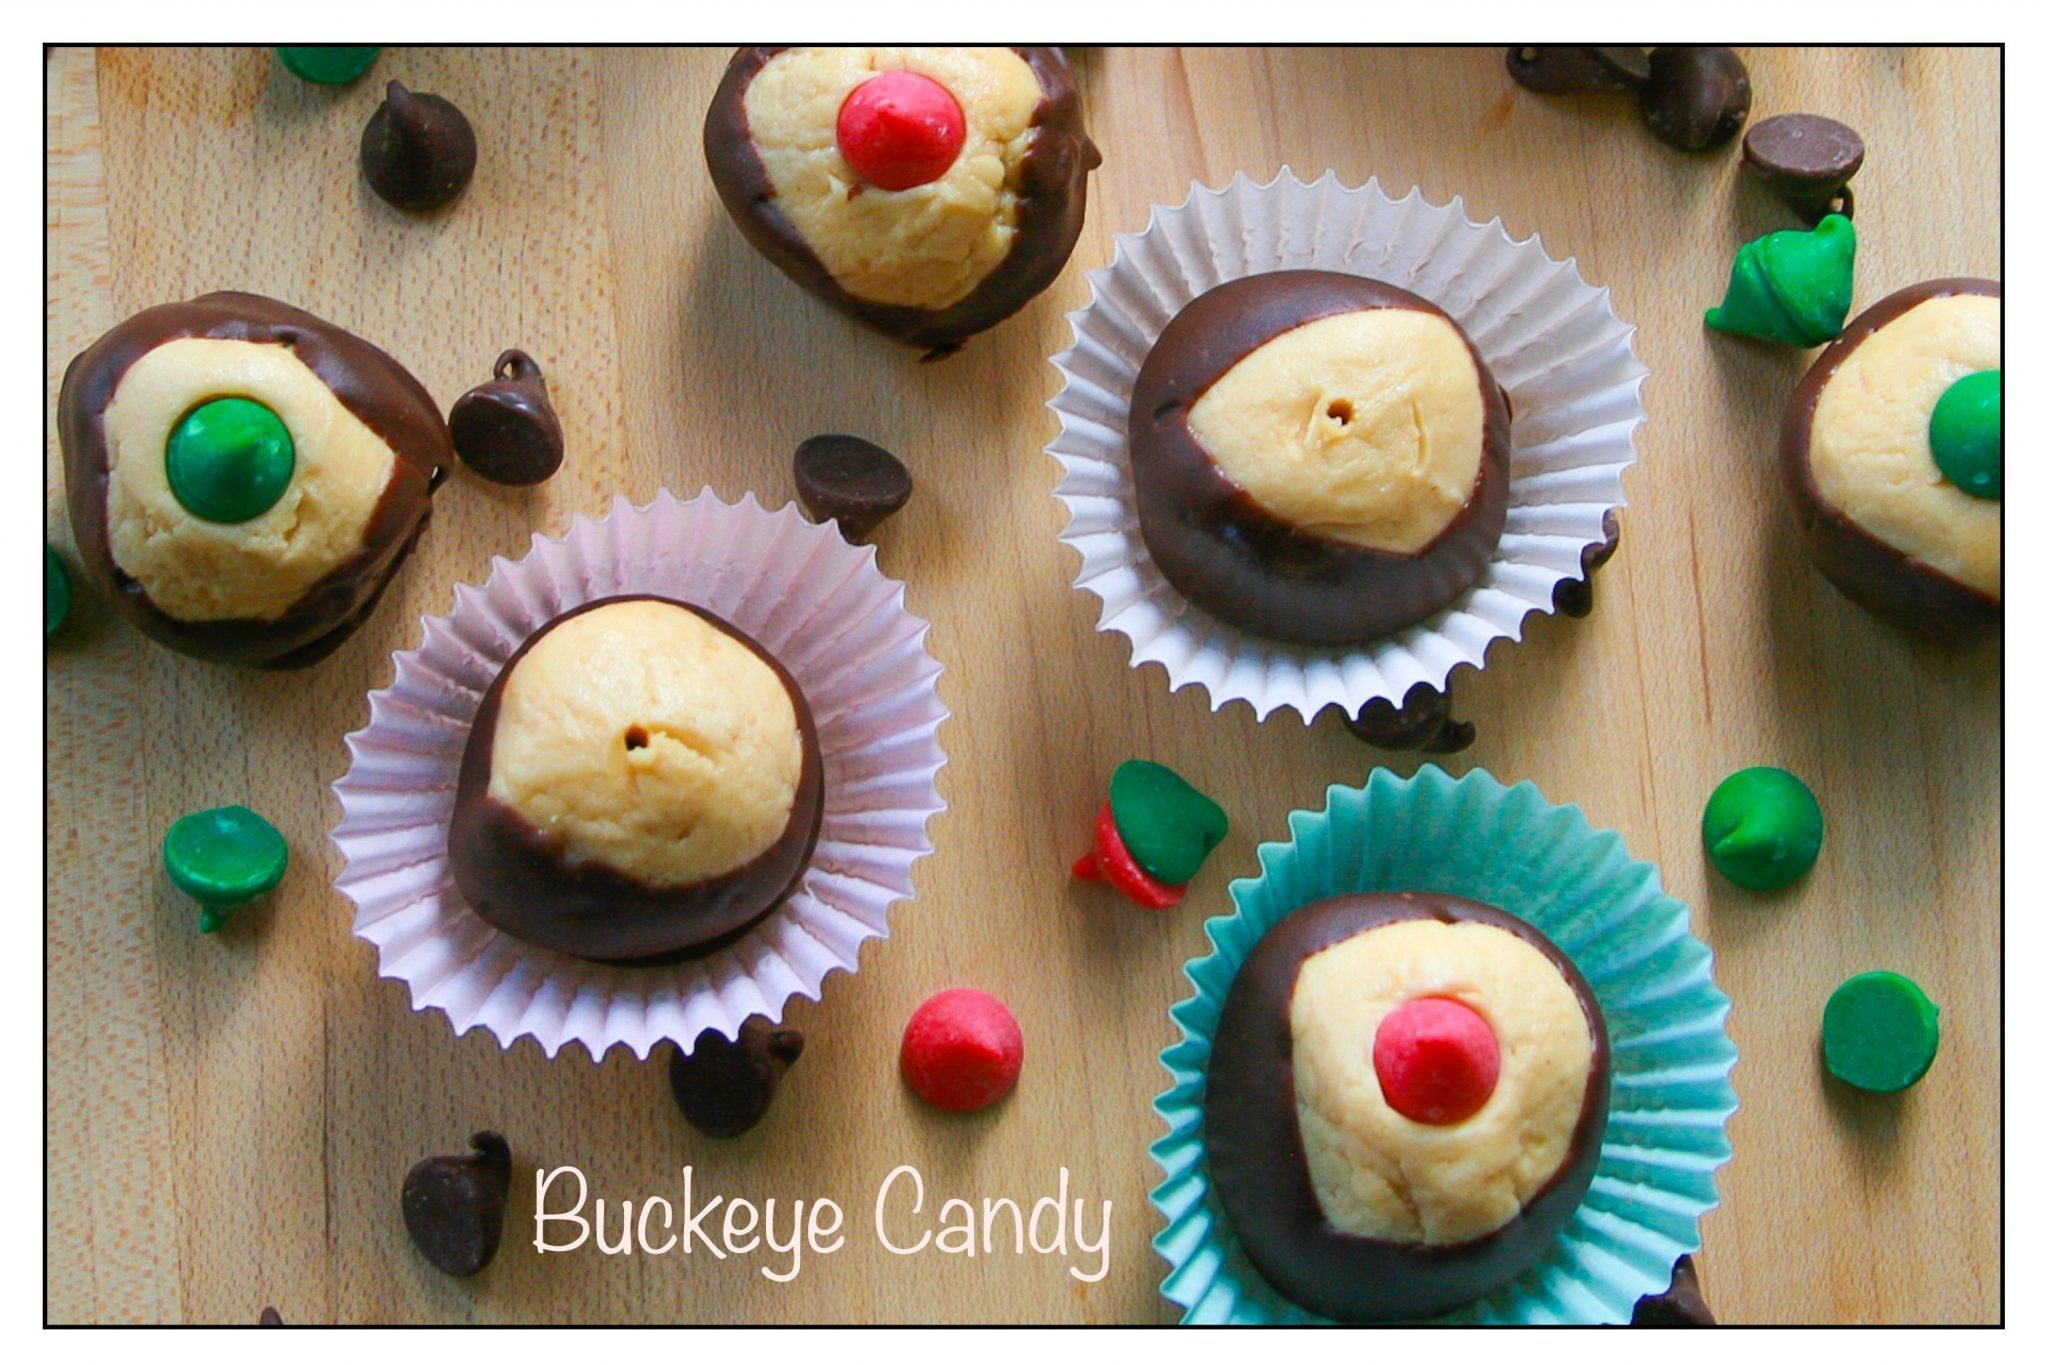 Buckeyes topped with Christmas colored chocolate chips